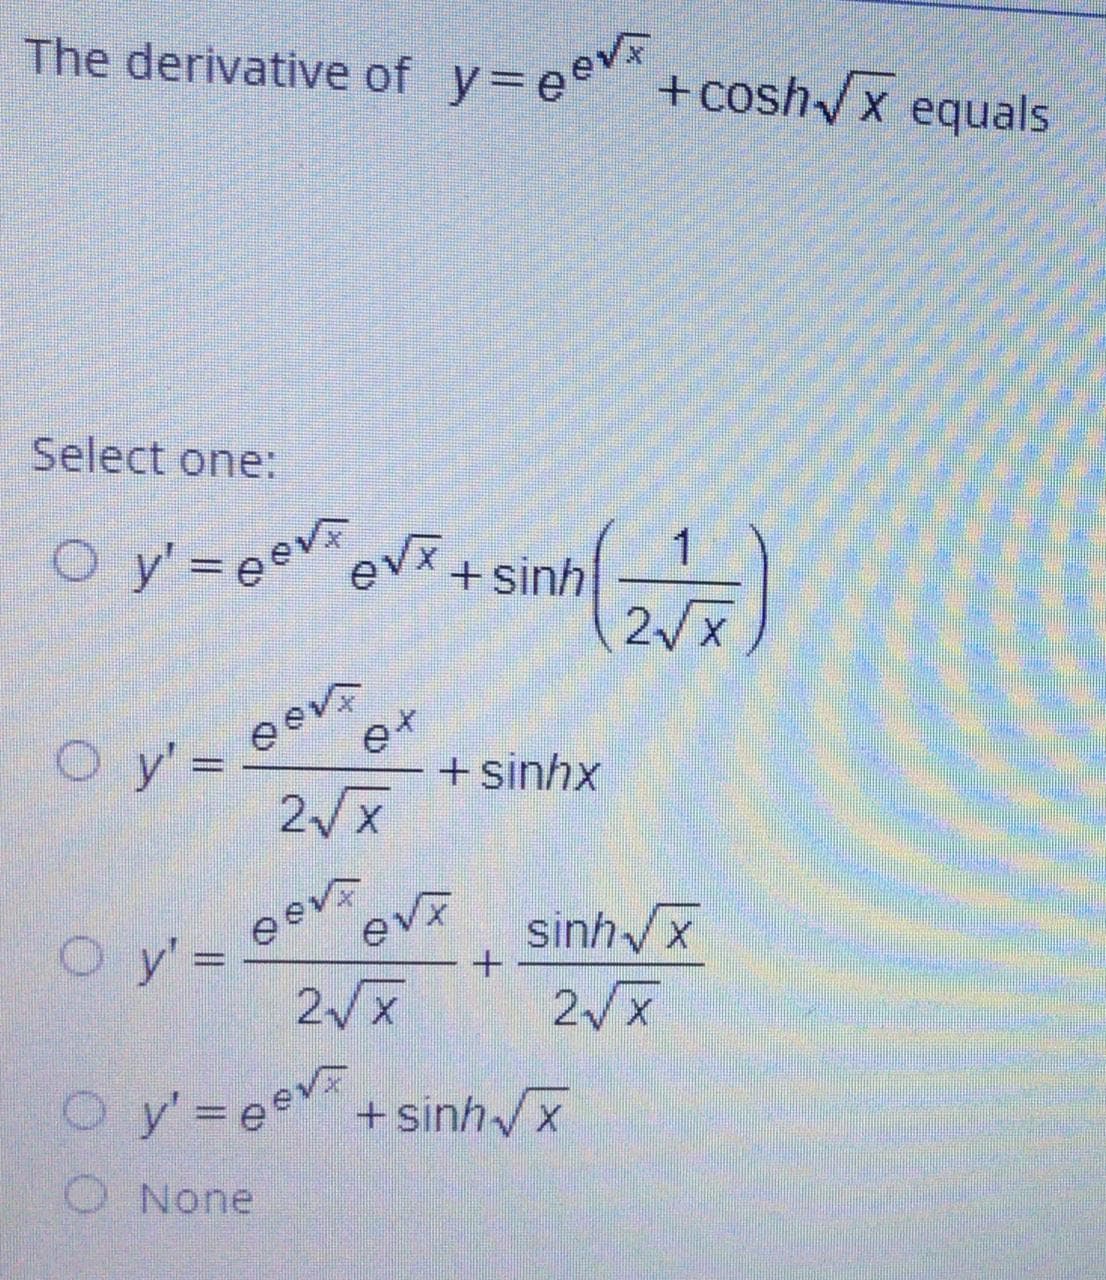 The derivative of y=eev
+cosh/x equals
Select one:
1
+ sinh
2/x
y' =
2/x
+ sinhx
sinhx
Oy=eev
+ sinhx
%3D
O None
